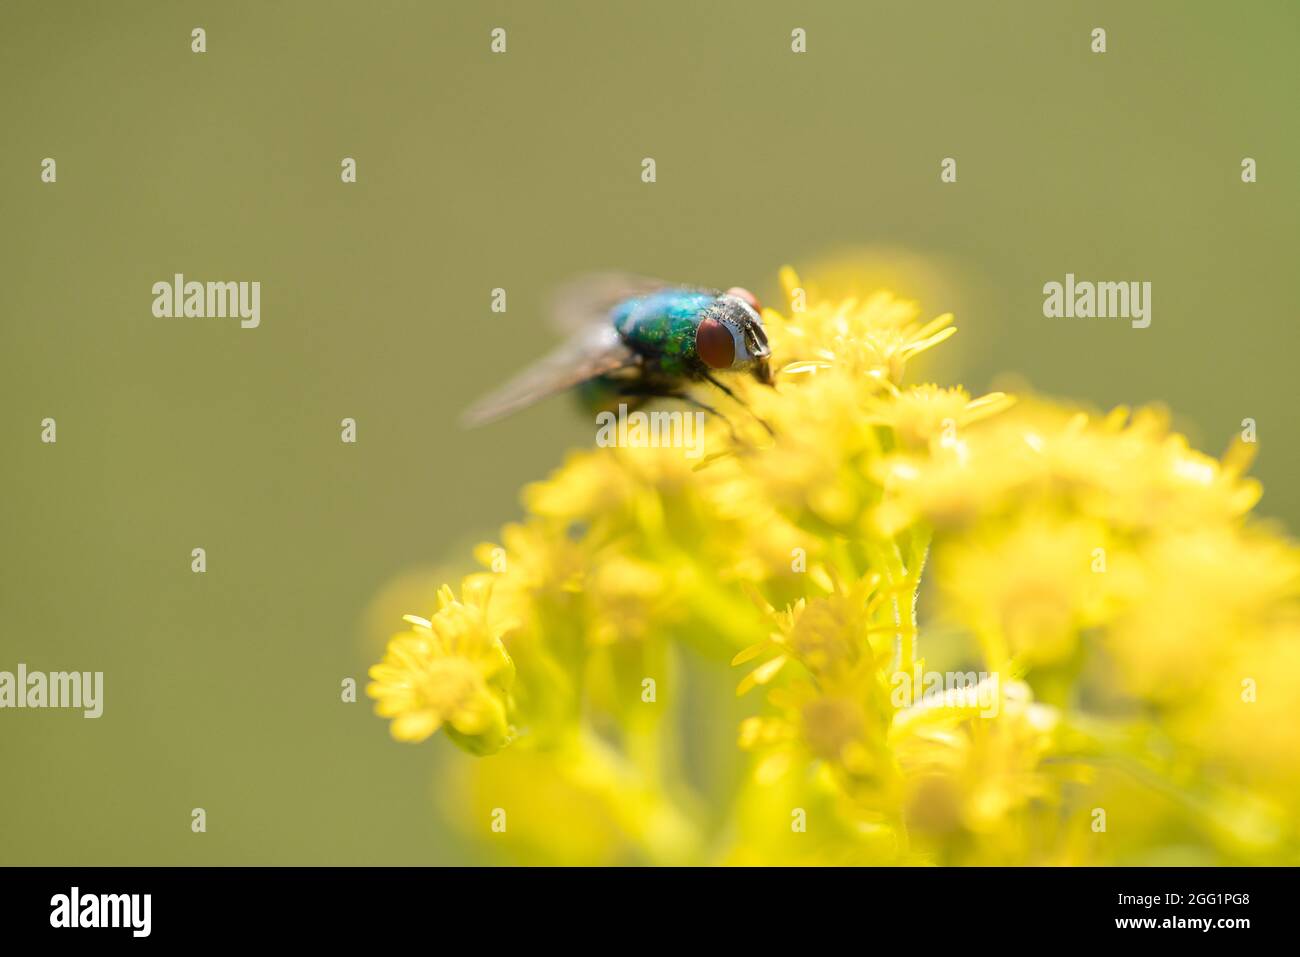 The Lucilia fly is a genus of blow flies, in the family Calliphoridae. Stock Photo